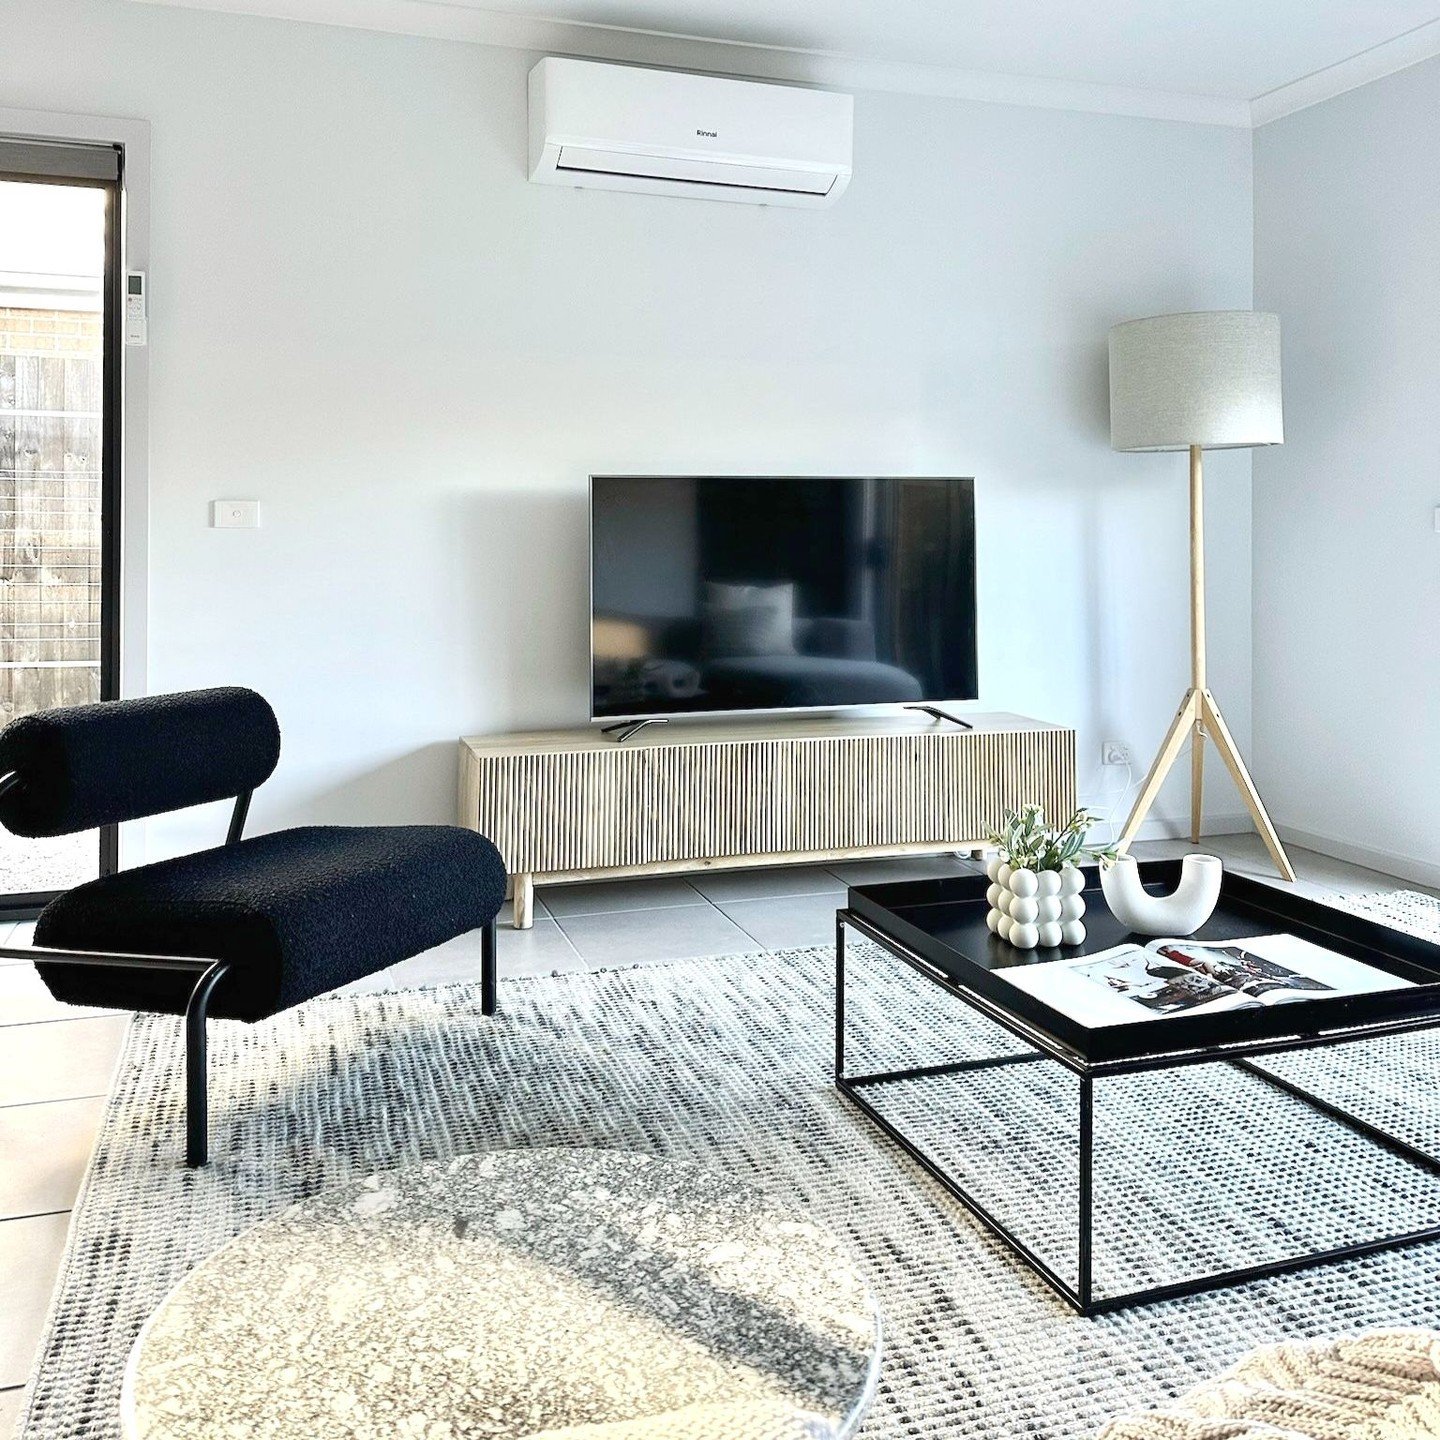 With a little creativity and effort, simple styling can transform any living room into an inviting and comfortable space for relaxing and entertainment. The key is balancing function with aesthetics. 

#kepropertystylingmelbourne #propertystylingmelb